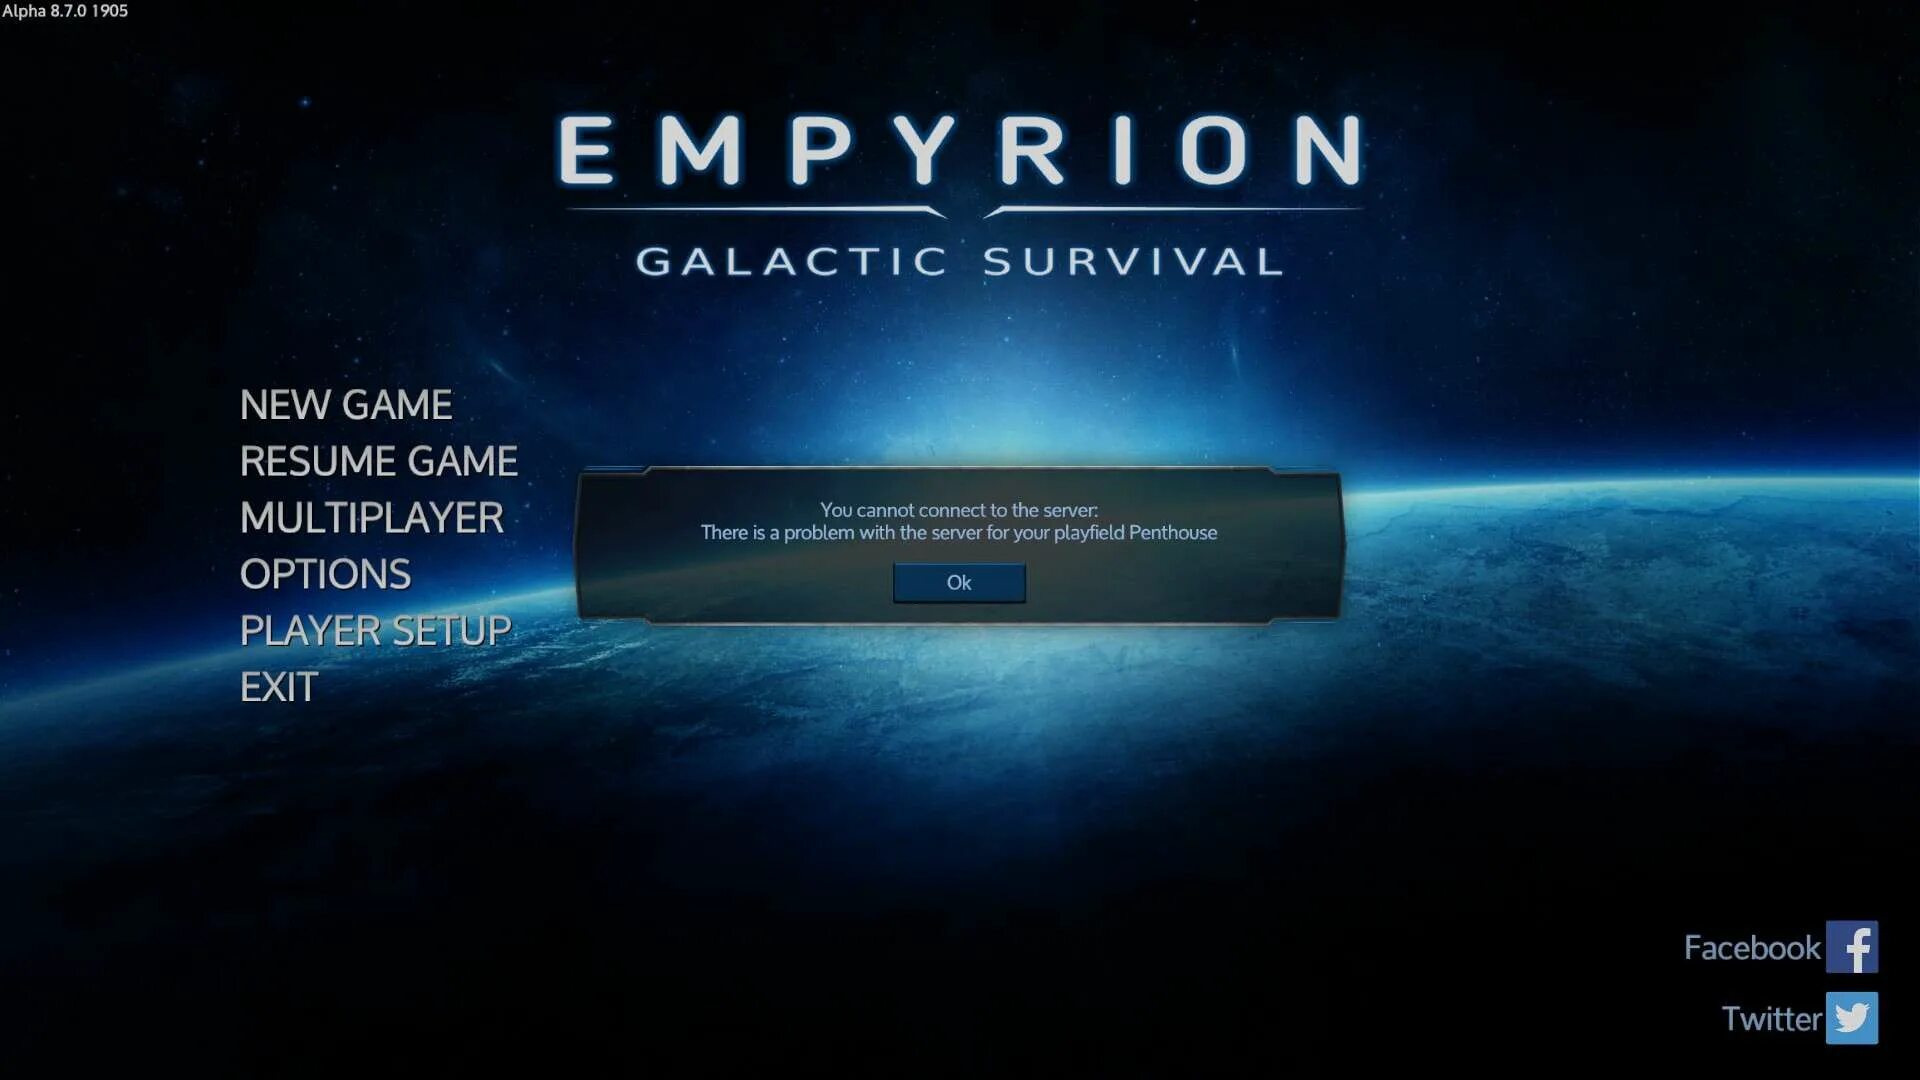 Conflict server. Купон Galactic. Resume game. Empyrion – Galactic Survival кооператив. Enter Galactic 2022.